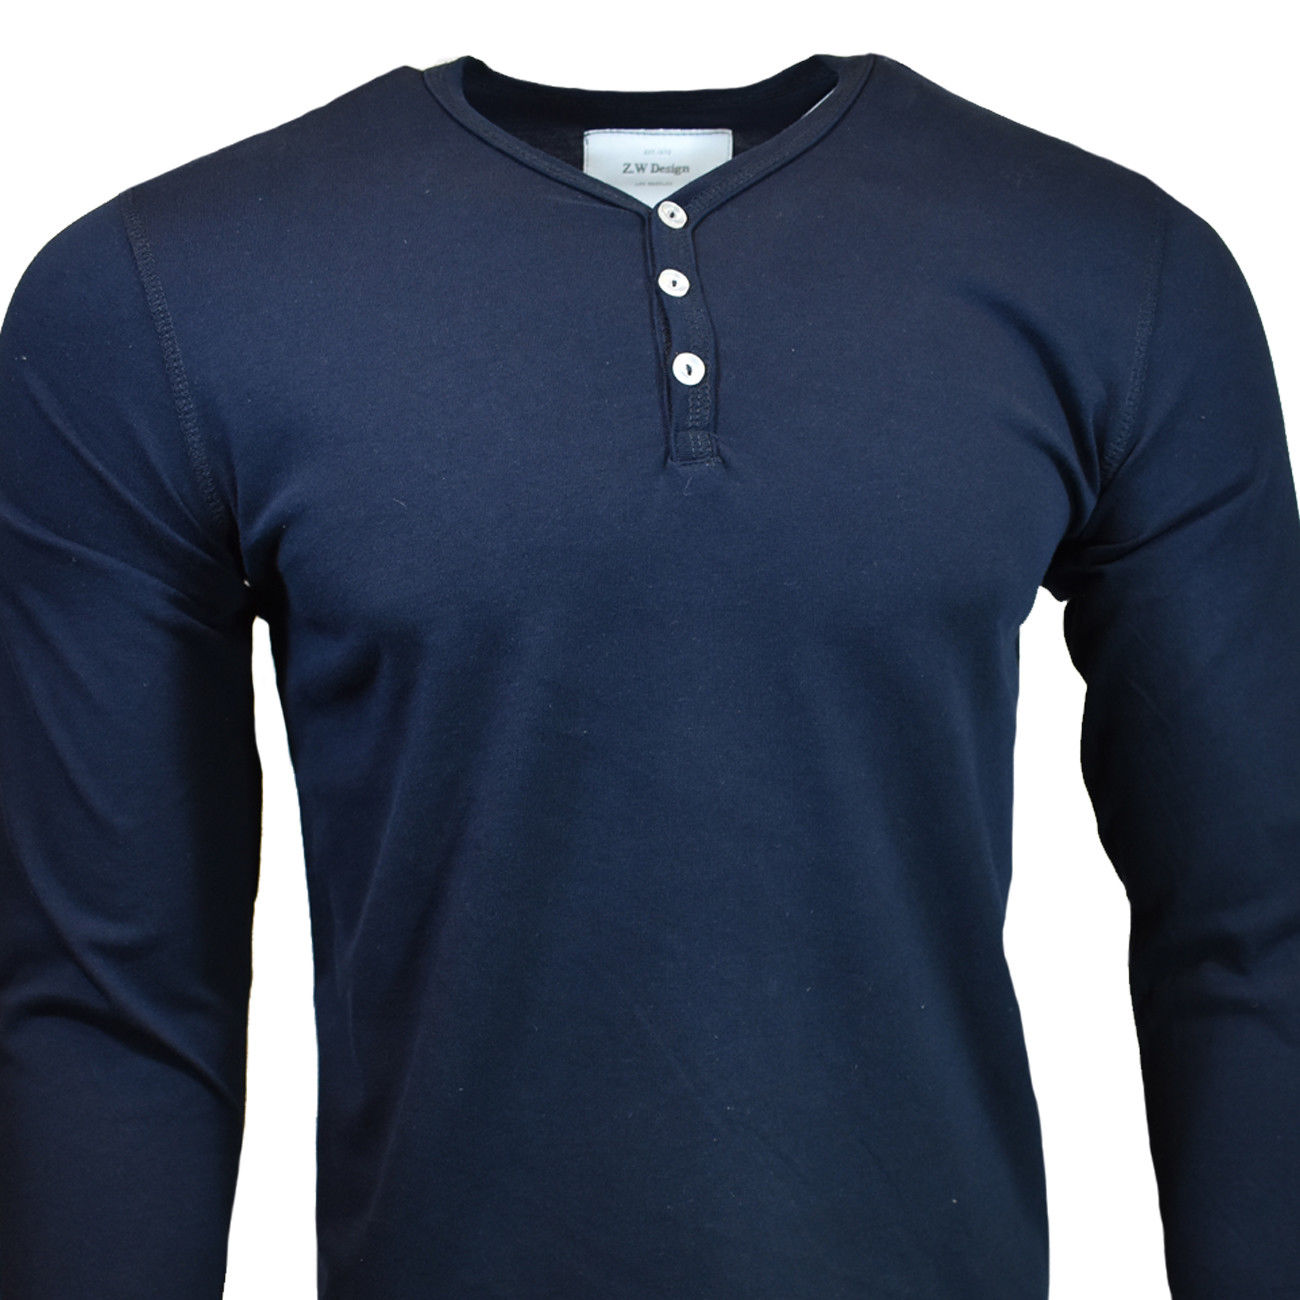 Henley Shirt Mens Long Sleeve Button Thermal Slim Fit Pullover NAVY BLUE